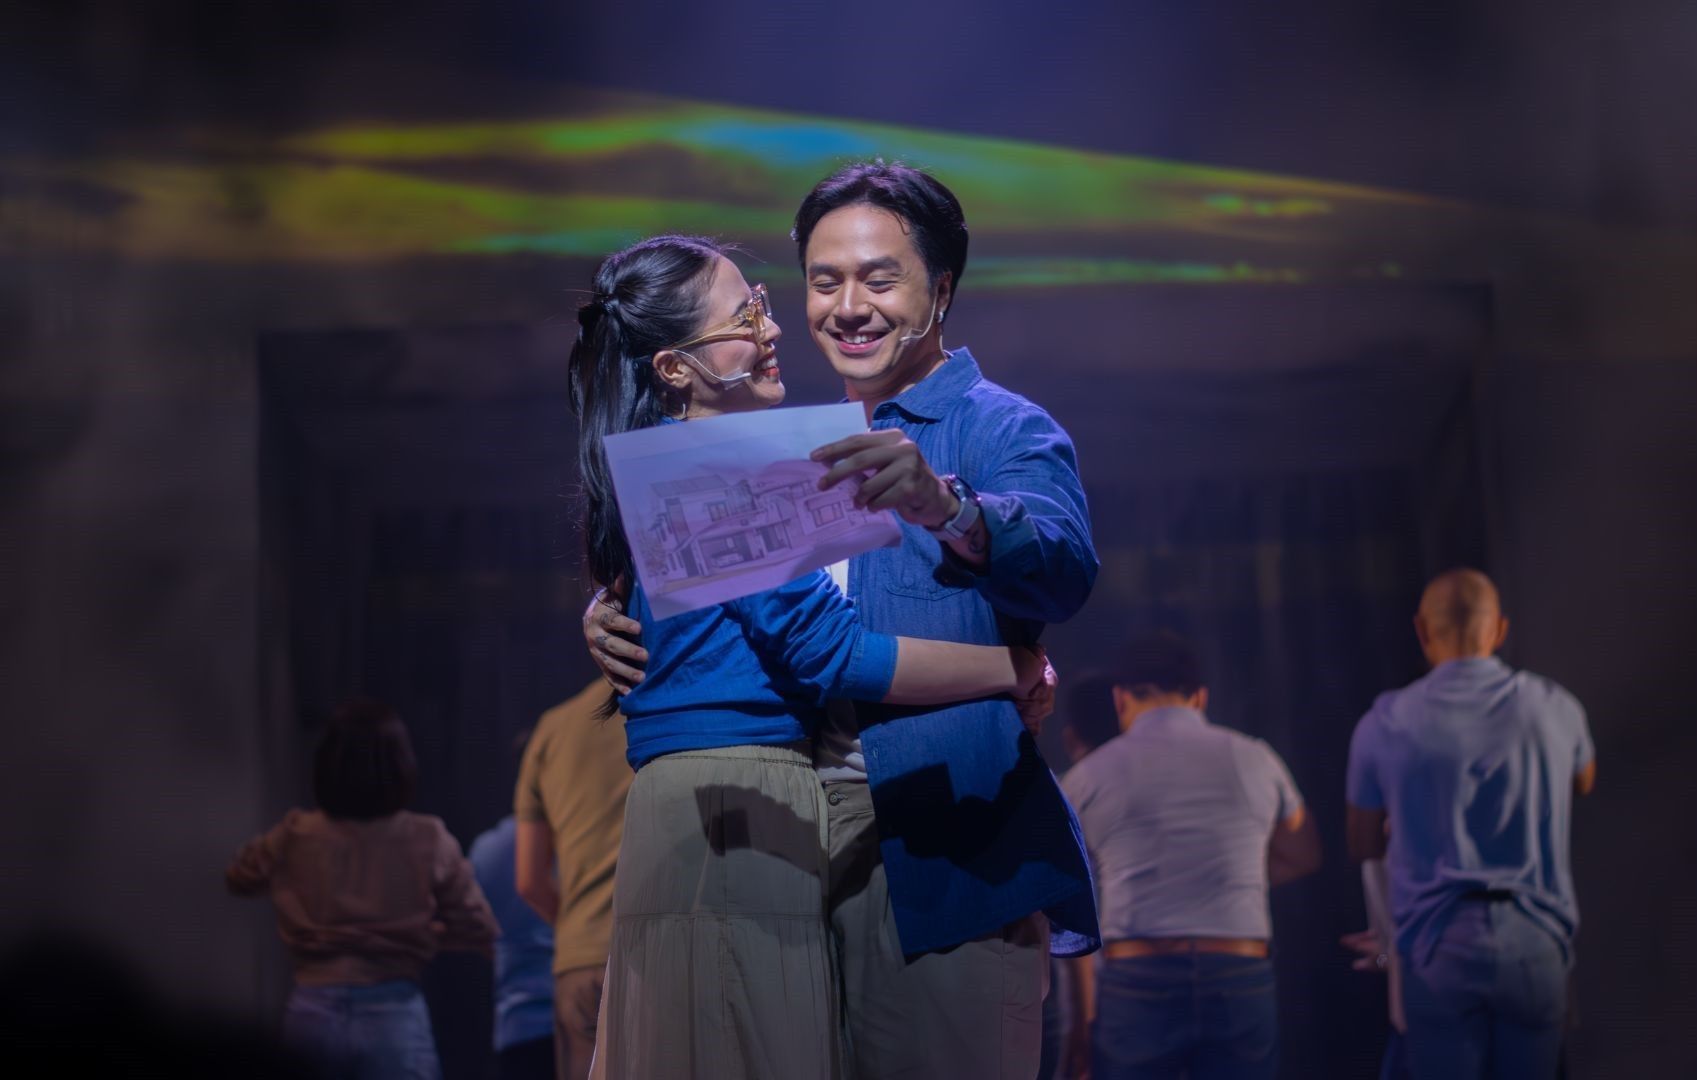 Ben&Ben songs shine in 'One More Chance' musical